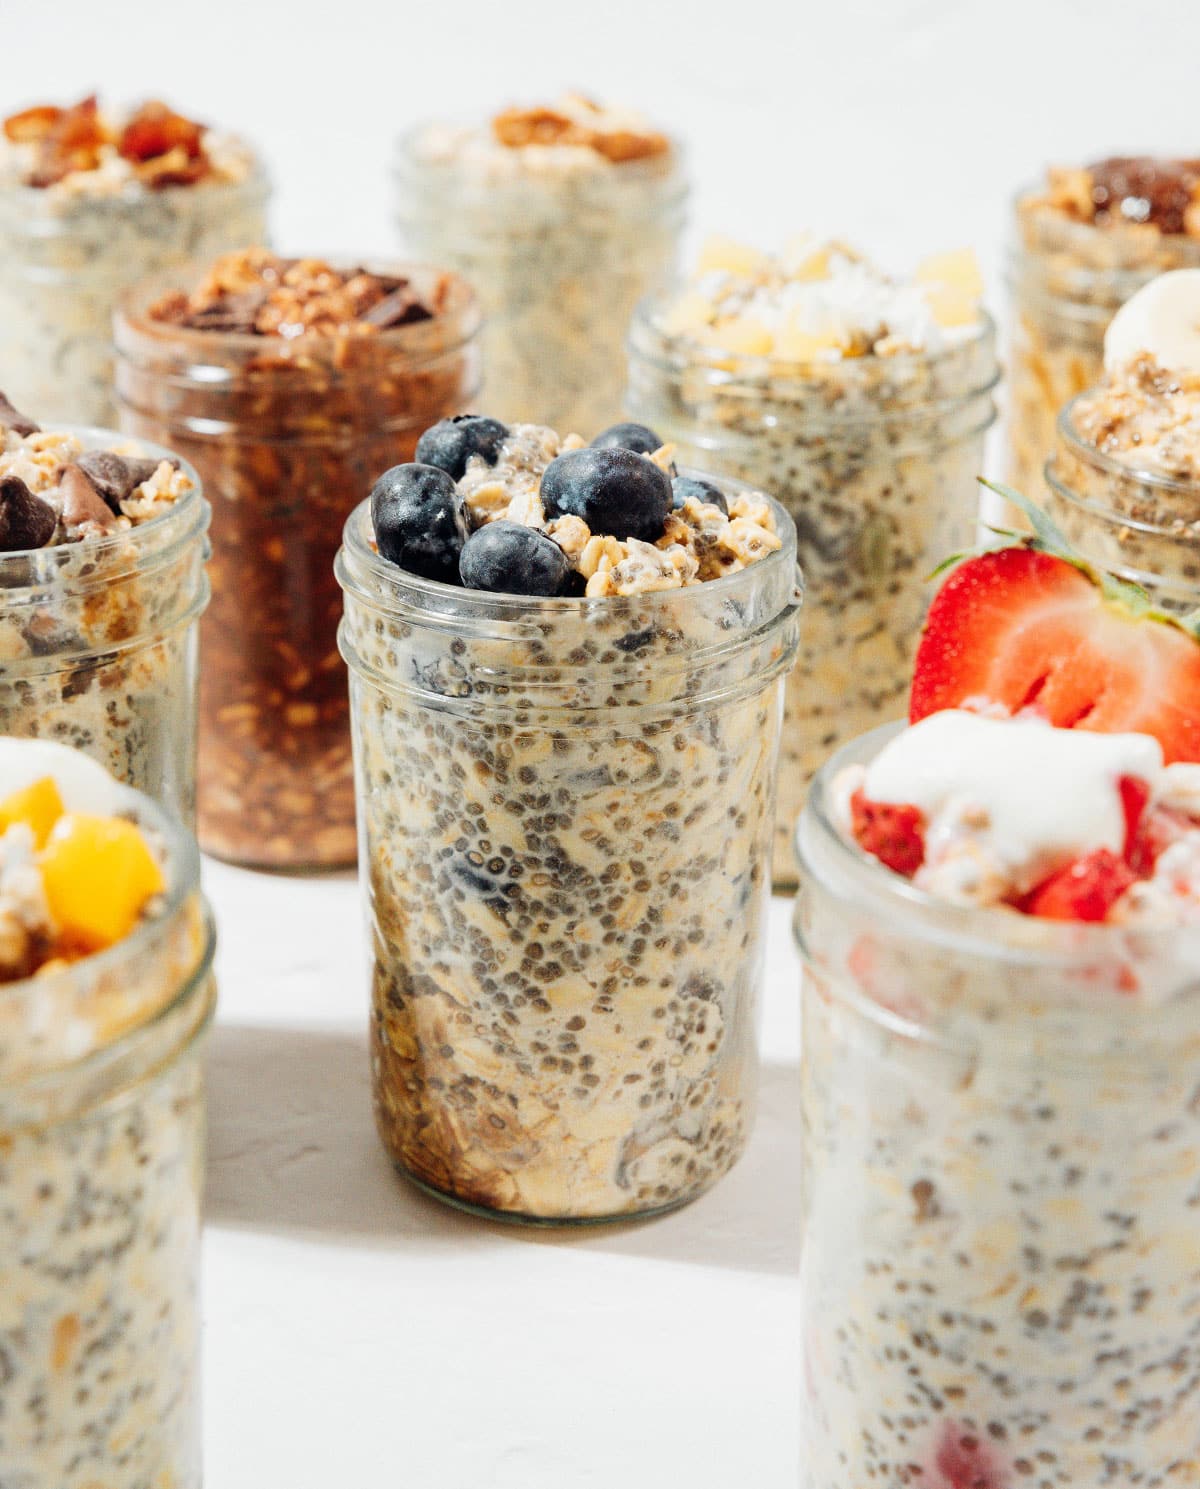 Many flavors of overnight oats.